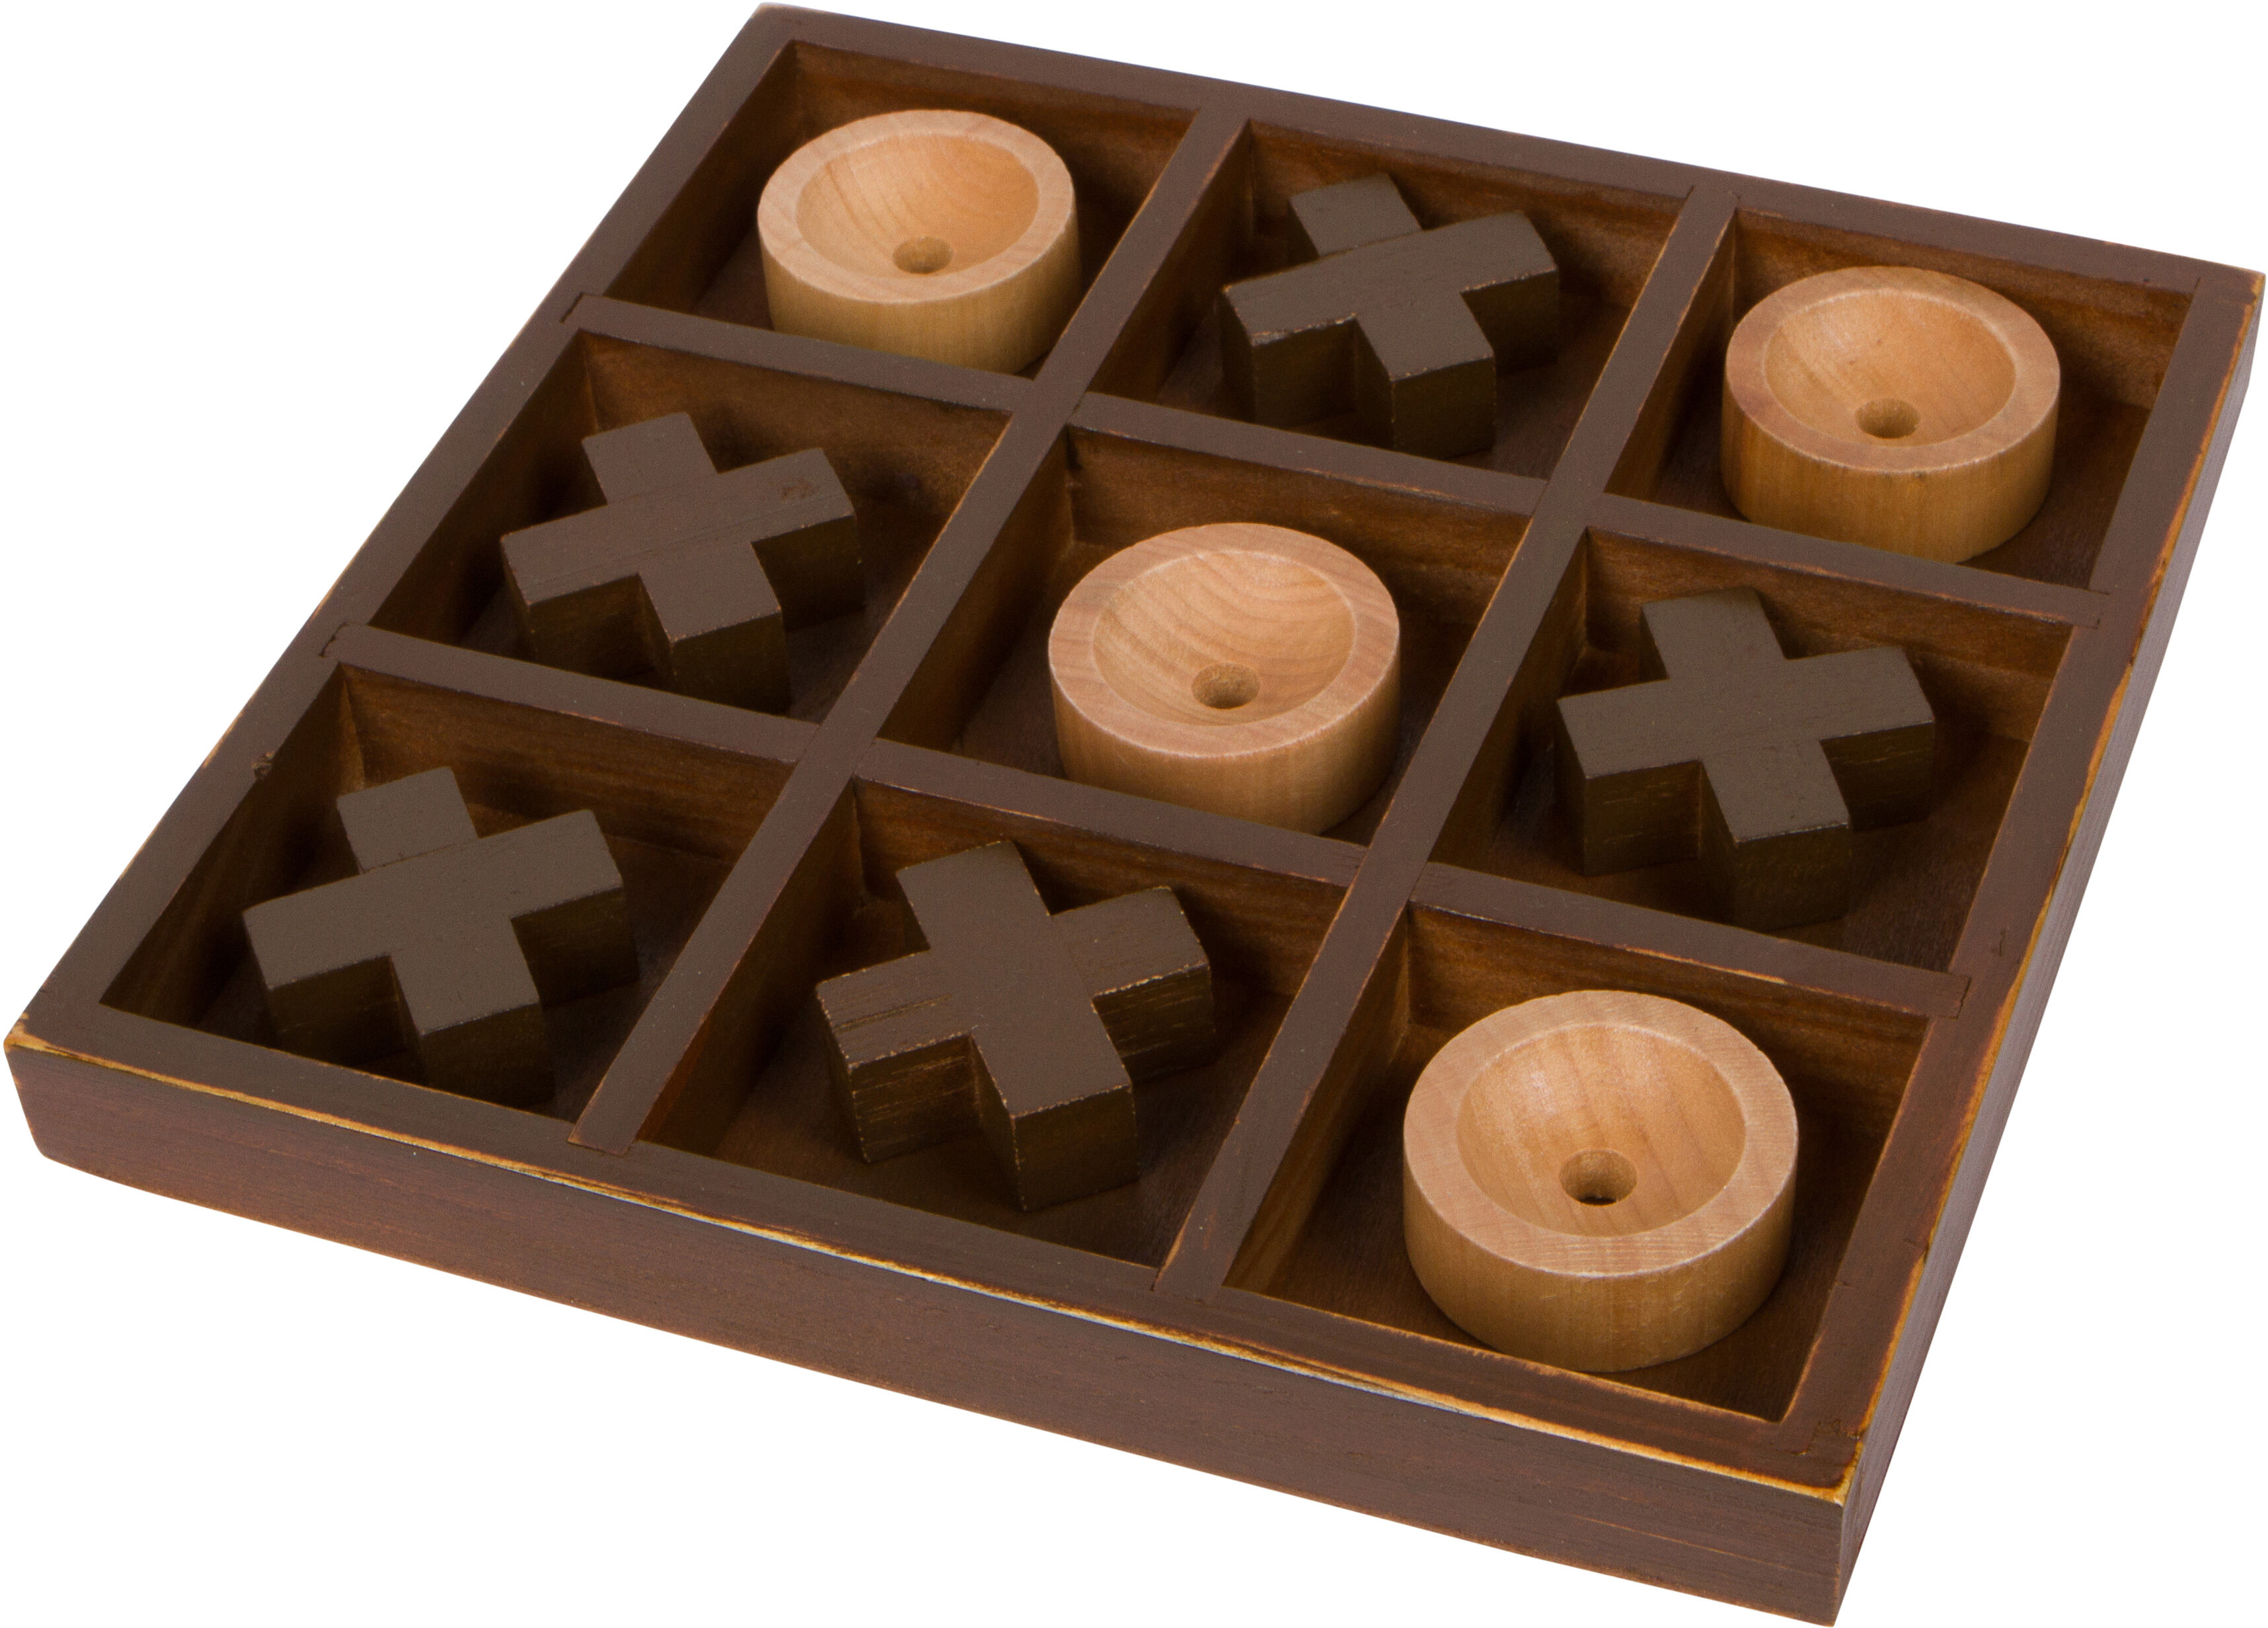 Trademark Innovations 2 Player Wood Tic Tac Toe & Reviews